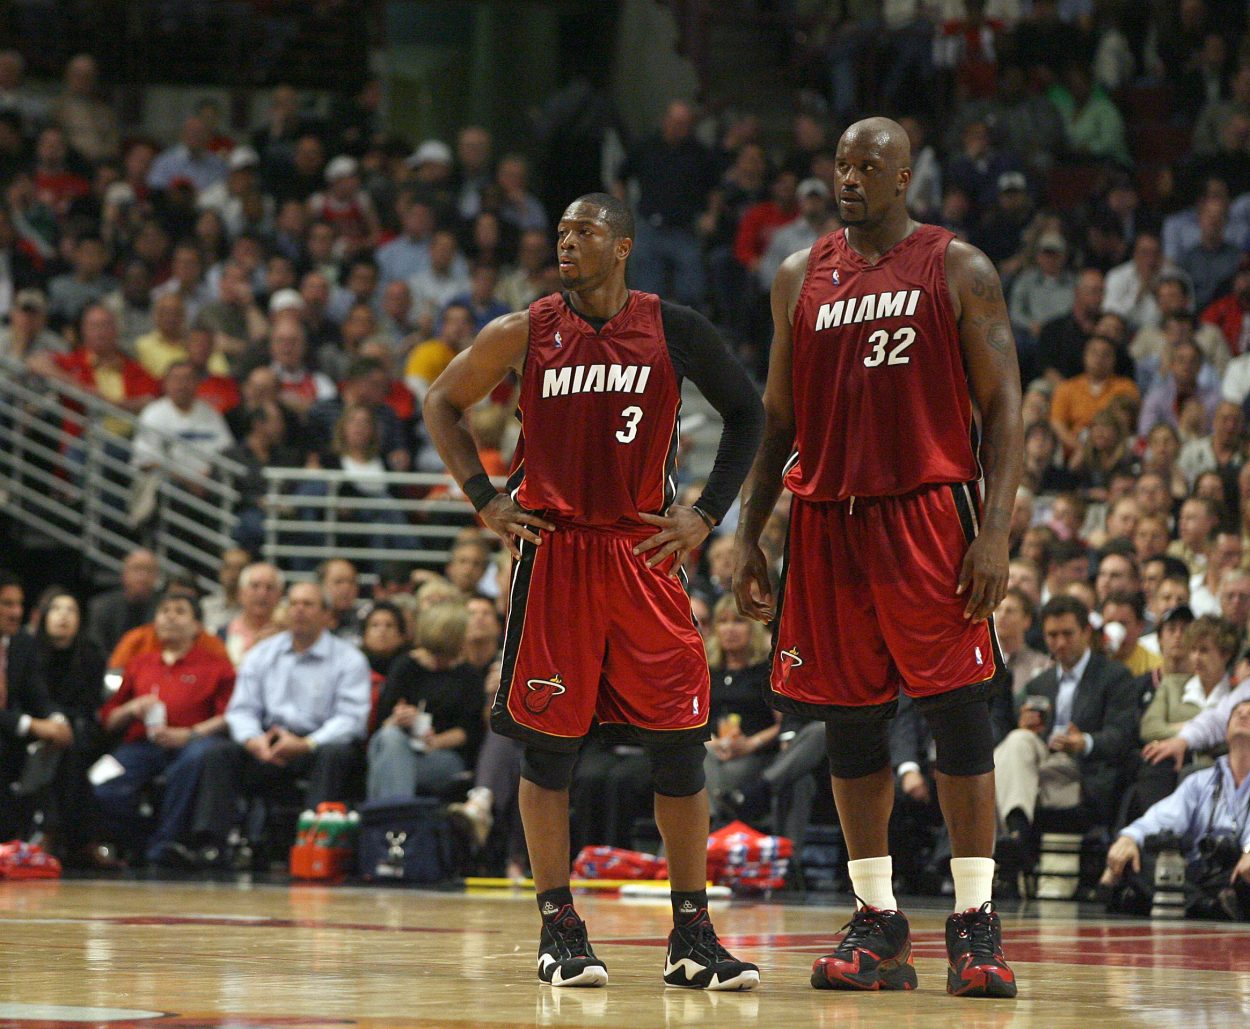 Miami Heat come back after retiring Shaquille O'Neal's No 32